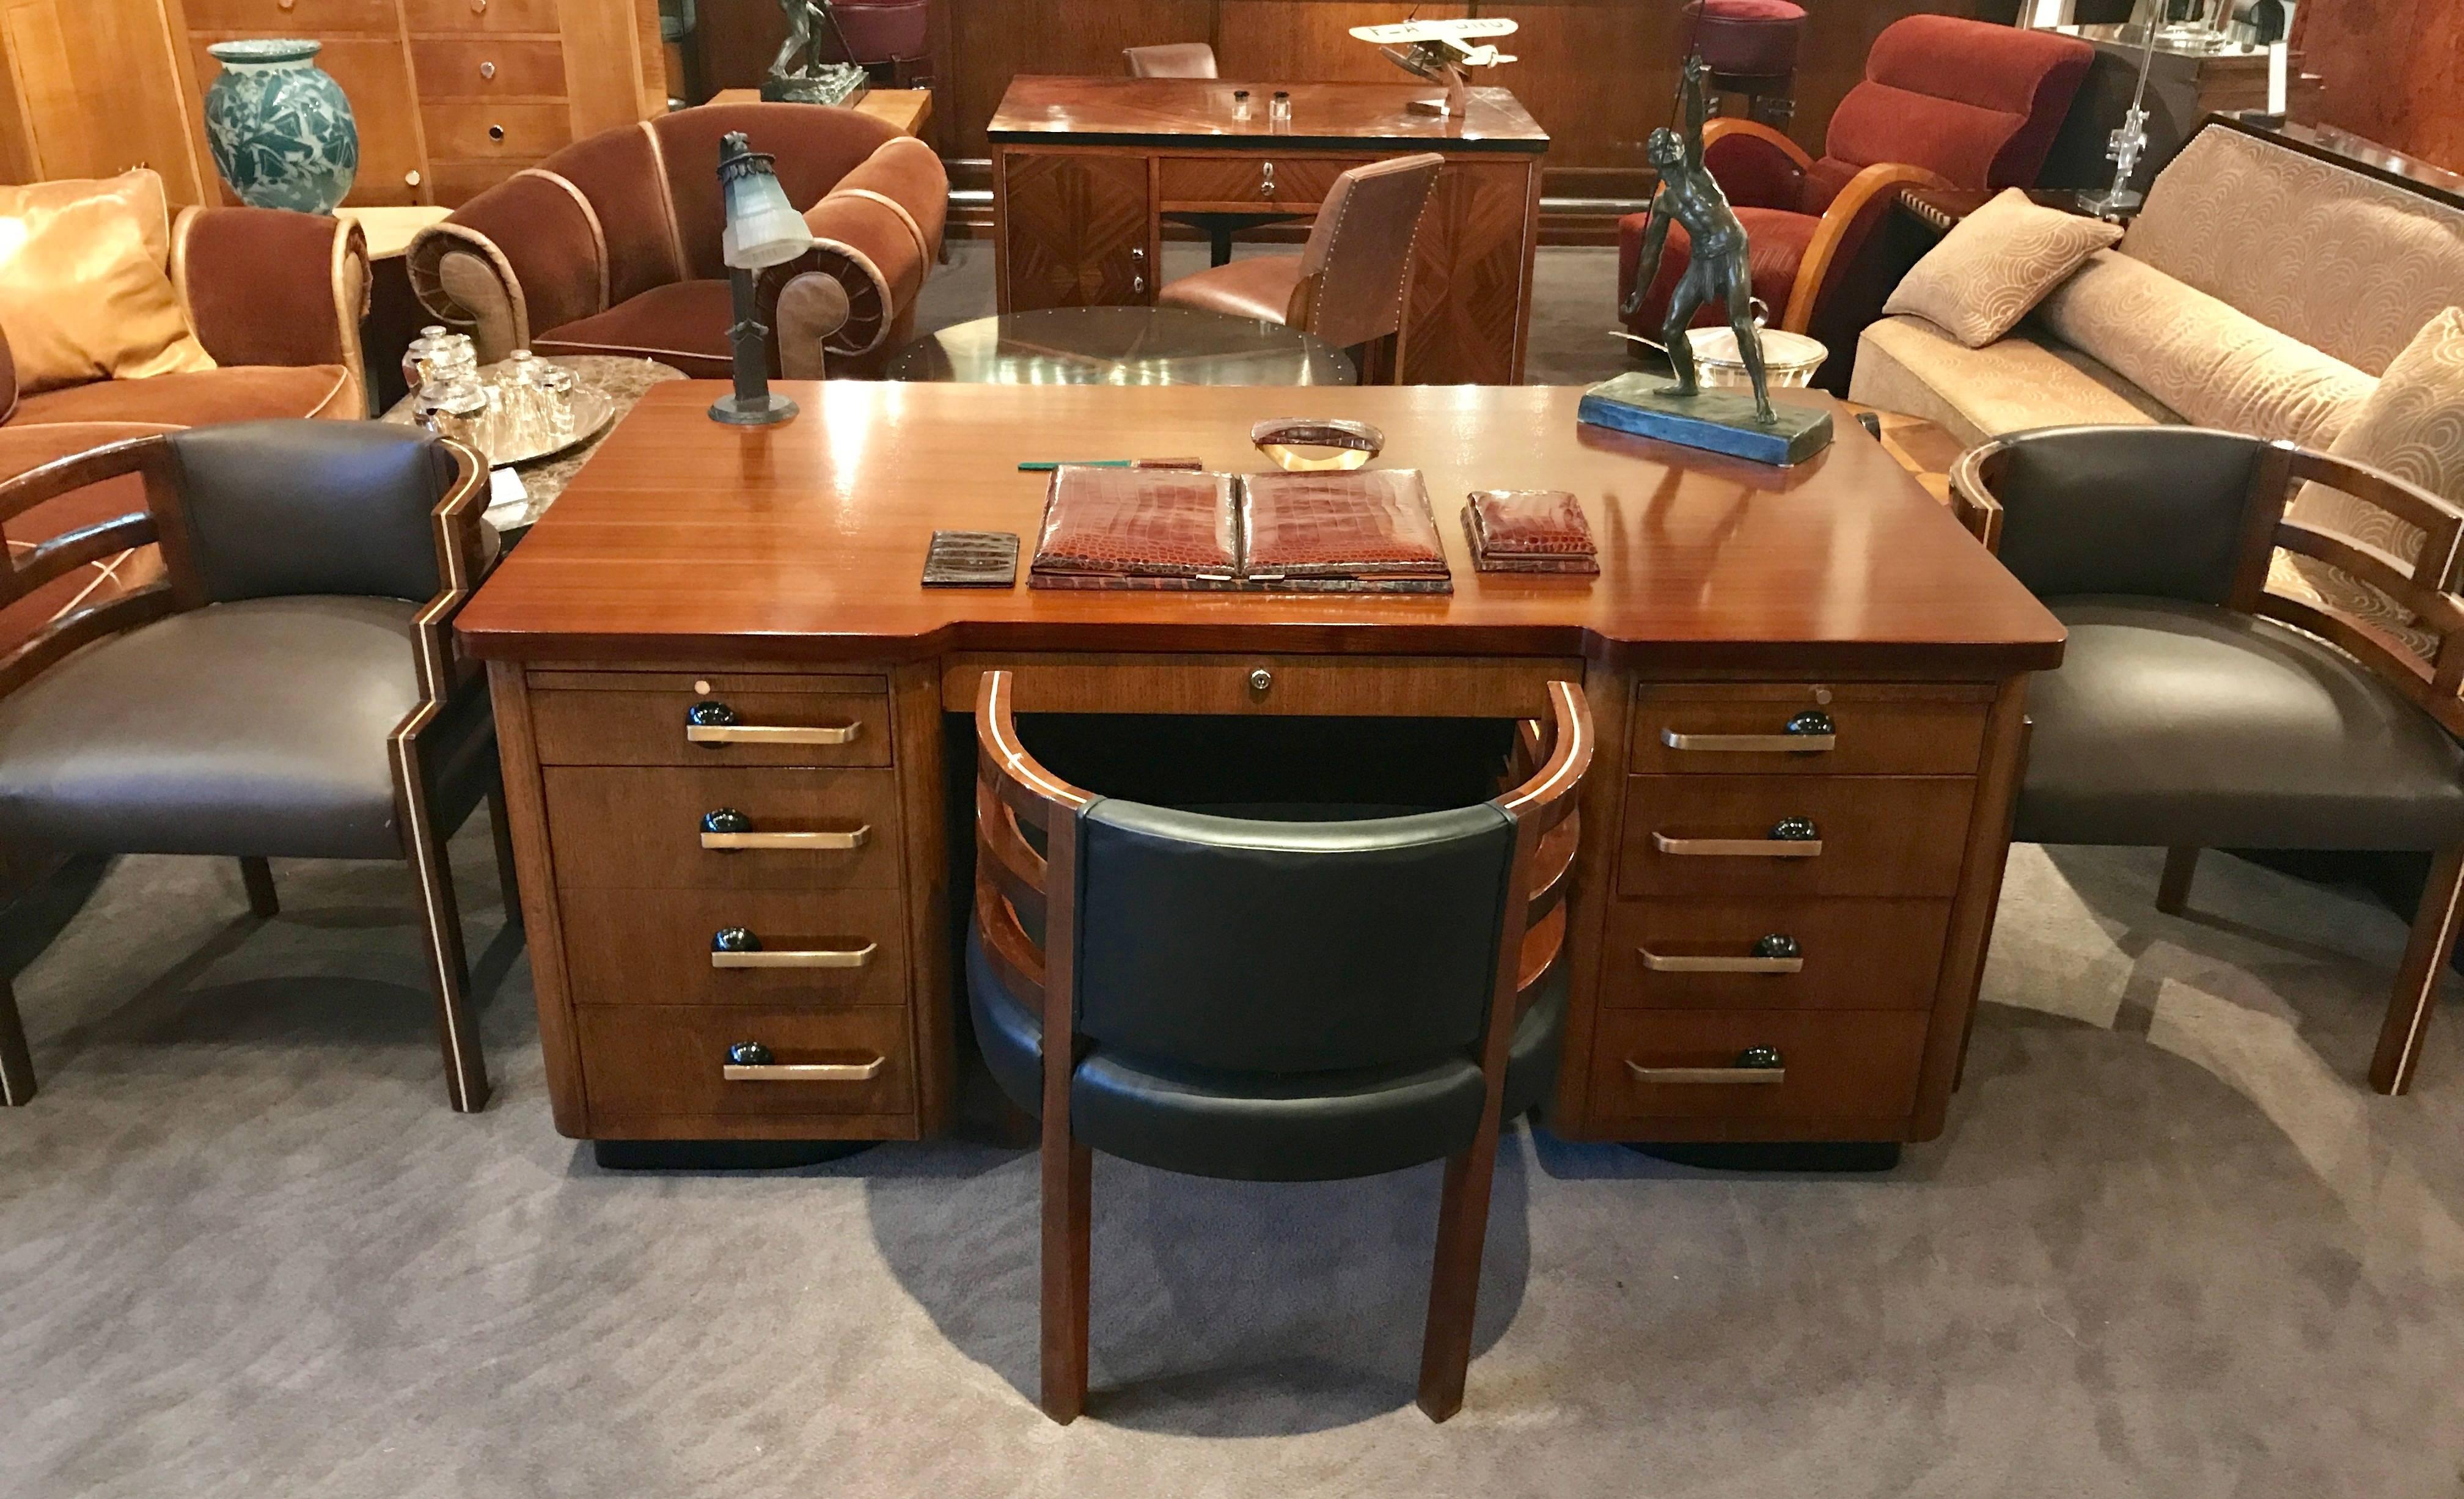 Executive Art Deco desk, extremely well made in America (Grand Rapids, Michigan) by Stow & Davis. Twin pedestal bases with a complimentary top, echoes the Classic shape. Very nice mahogany veneers and lots of drawers for just about everything: